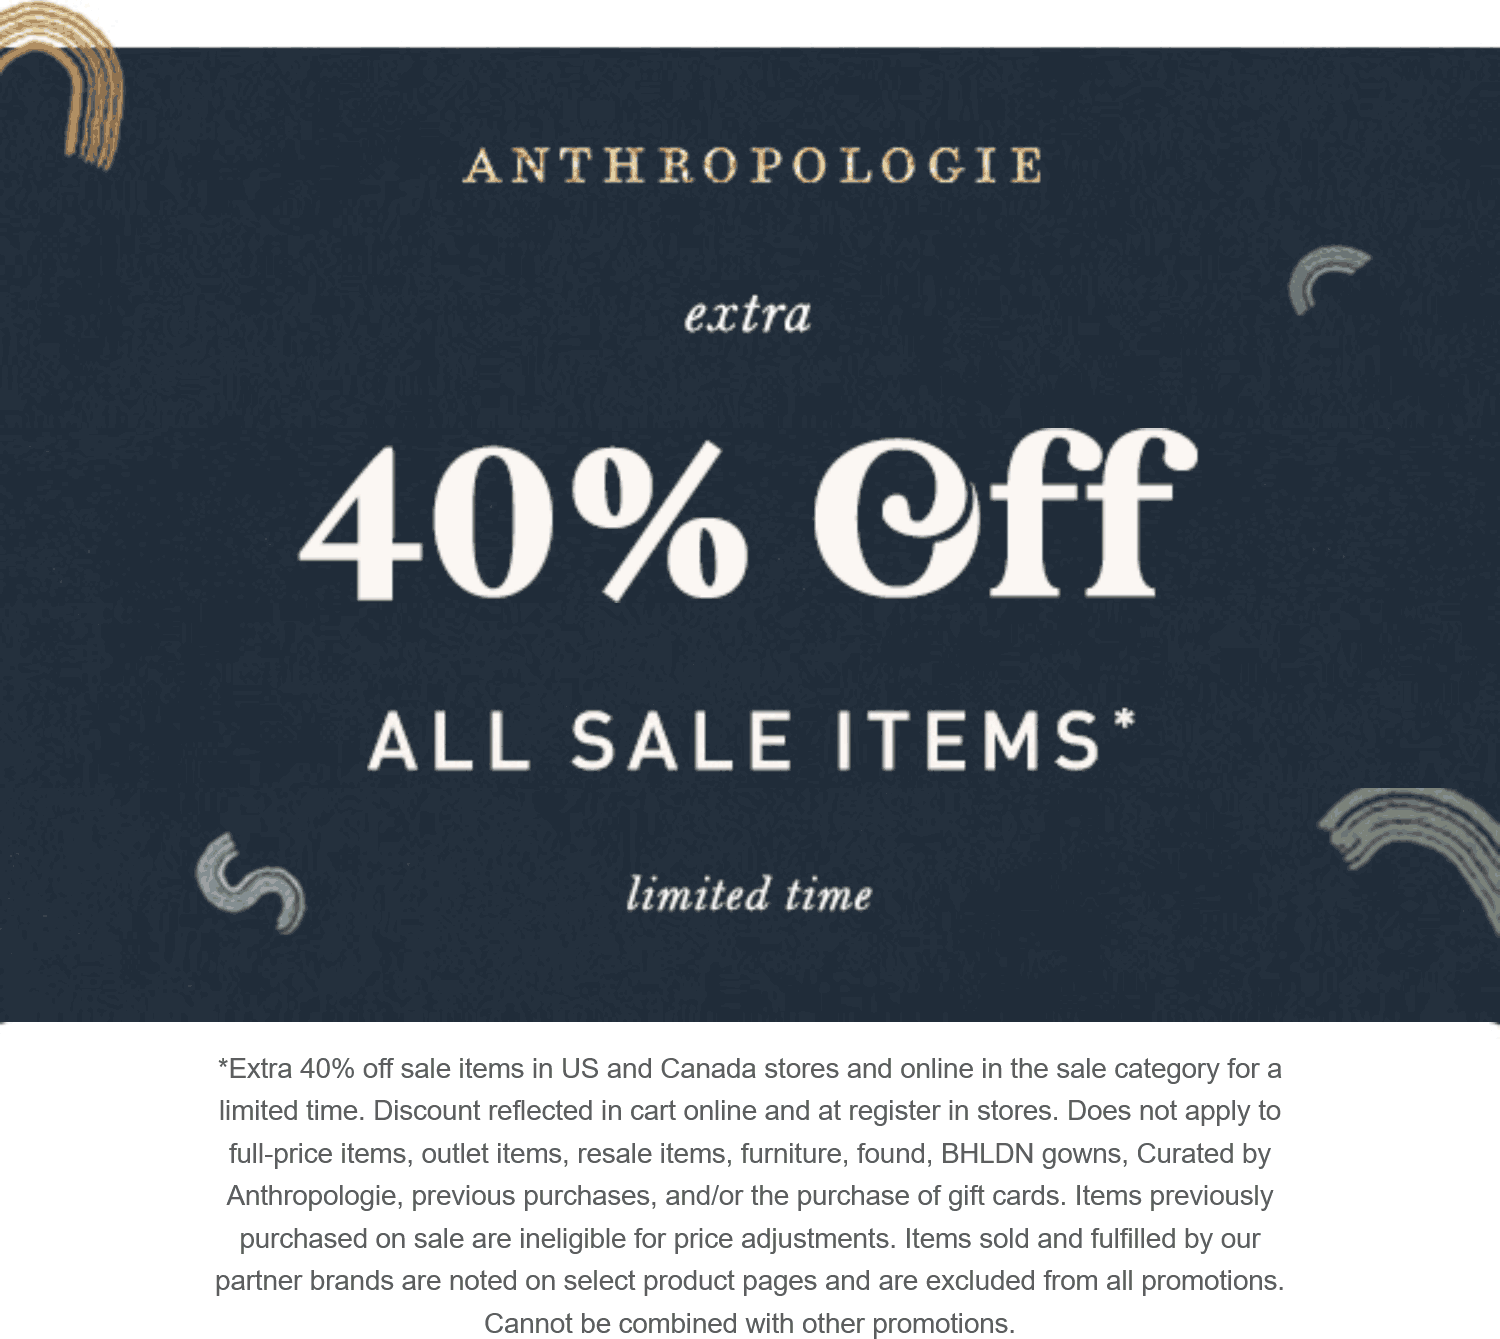 Anthropologie stores Coupon  Extra 40% off sale items at Anthropologie, ditto online #anthropologie 